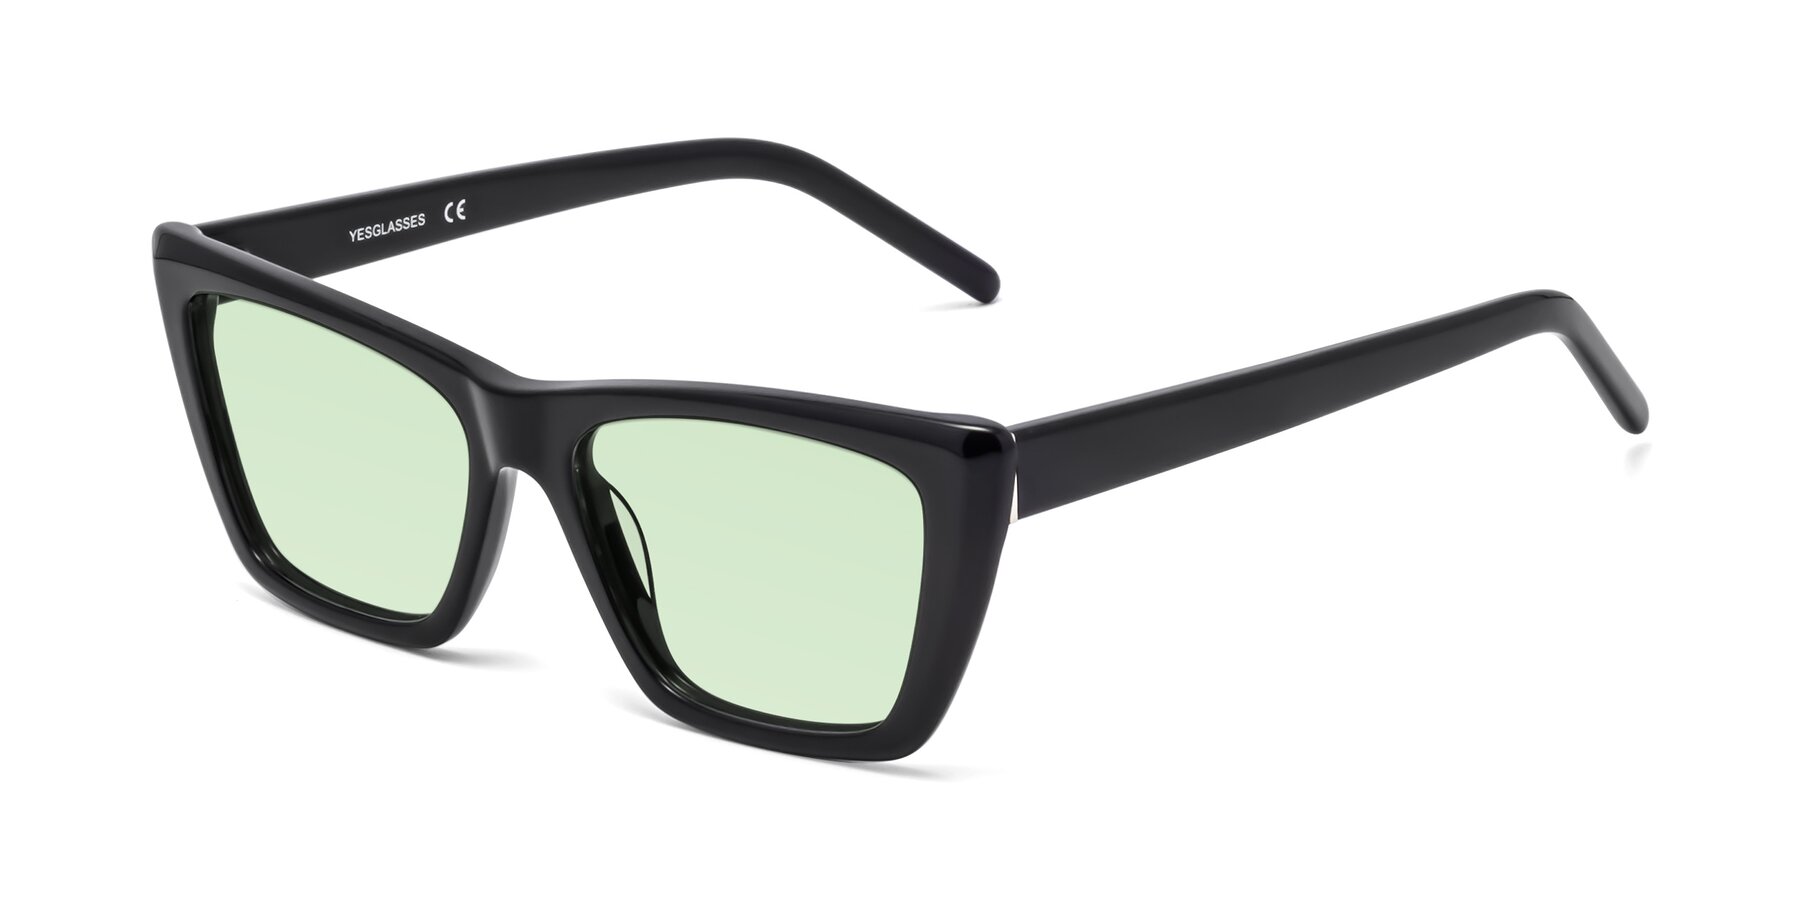 Angle of 1494 in Black with Light Green Tinted Lenses